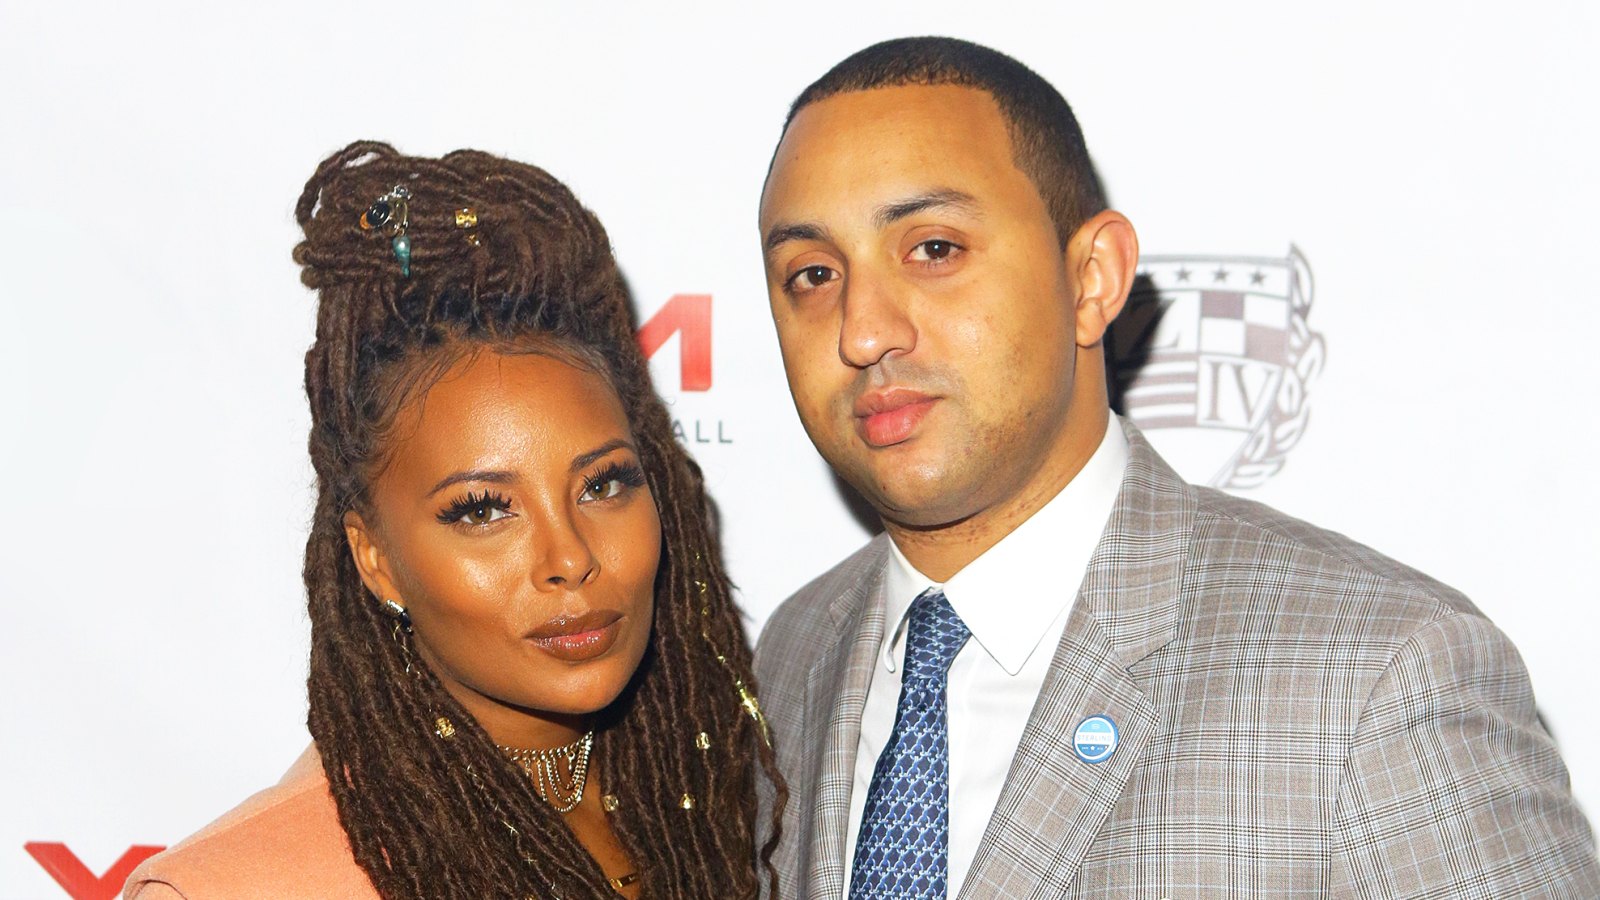 Eva Marcille and Michael Sterling attend the 9th Annual Celebration 4 Cause at King Plow Arts Center on December 22, 2016 in Atlanta, Georgia.